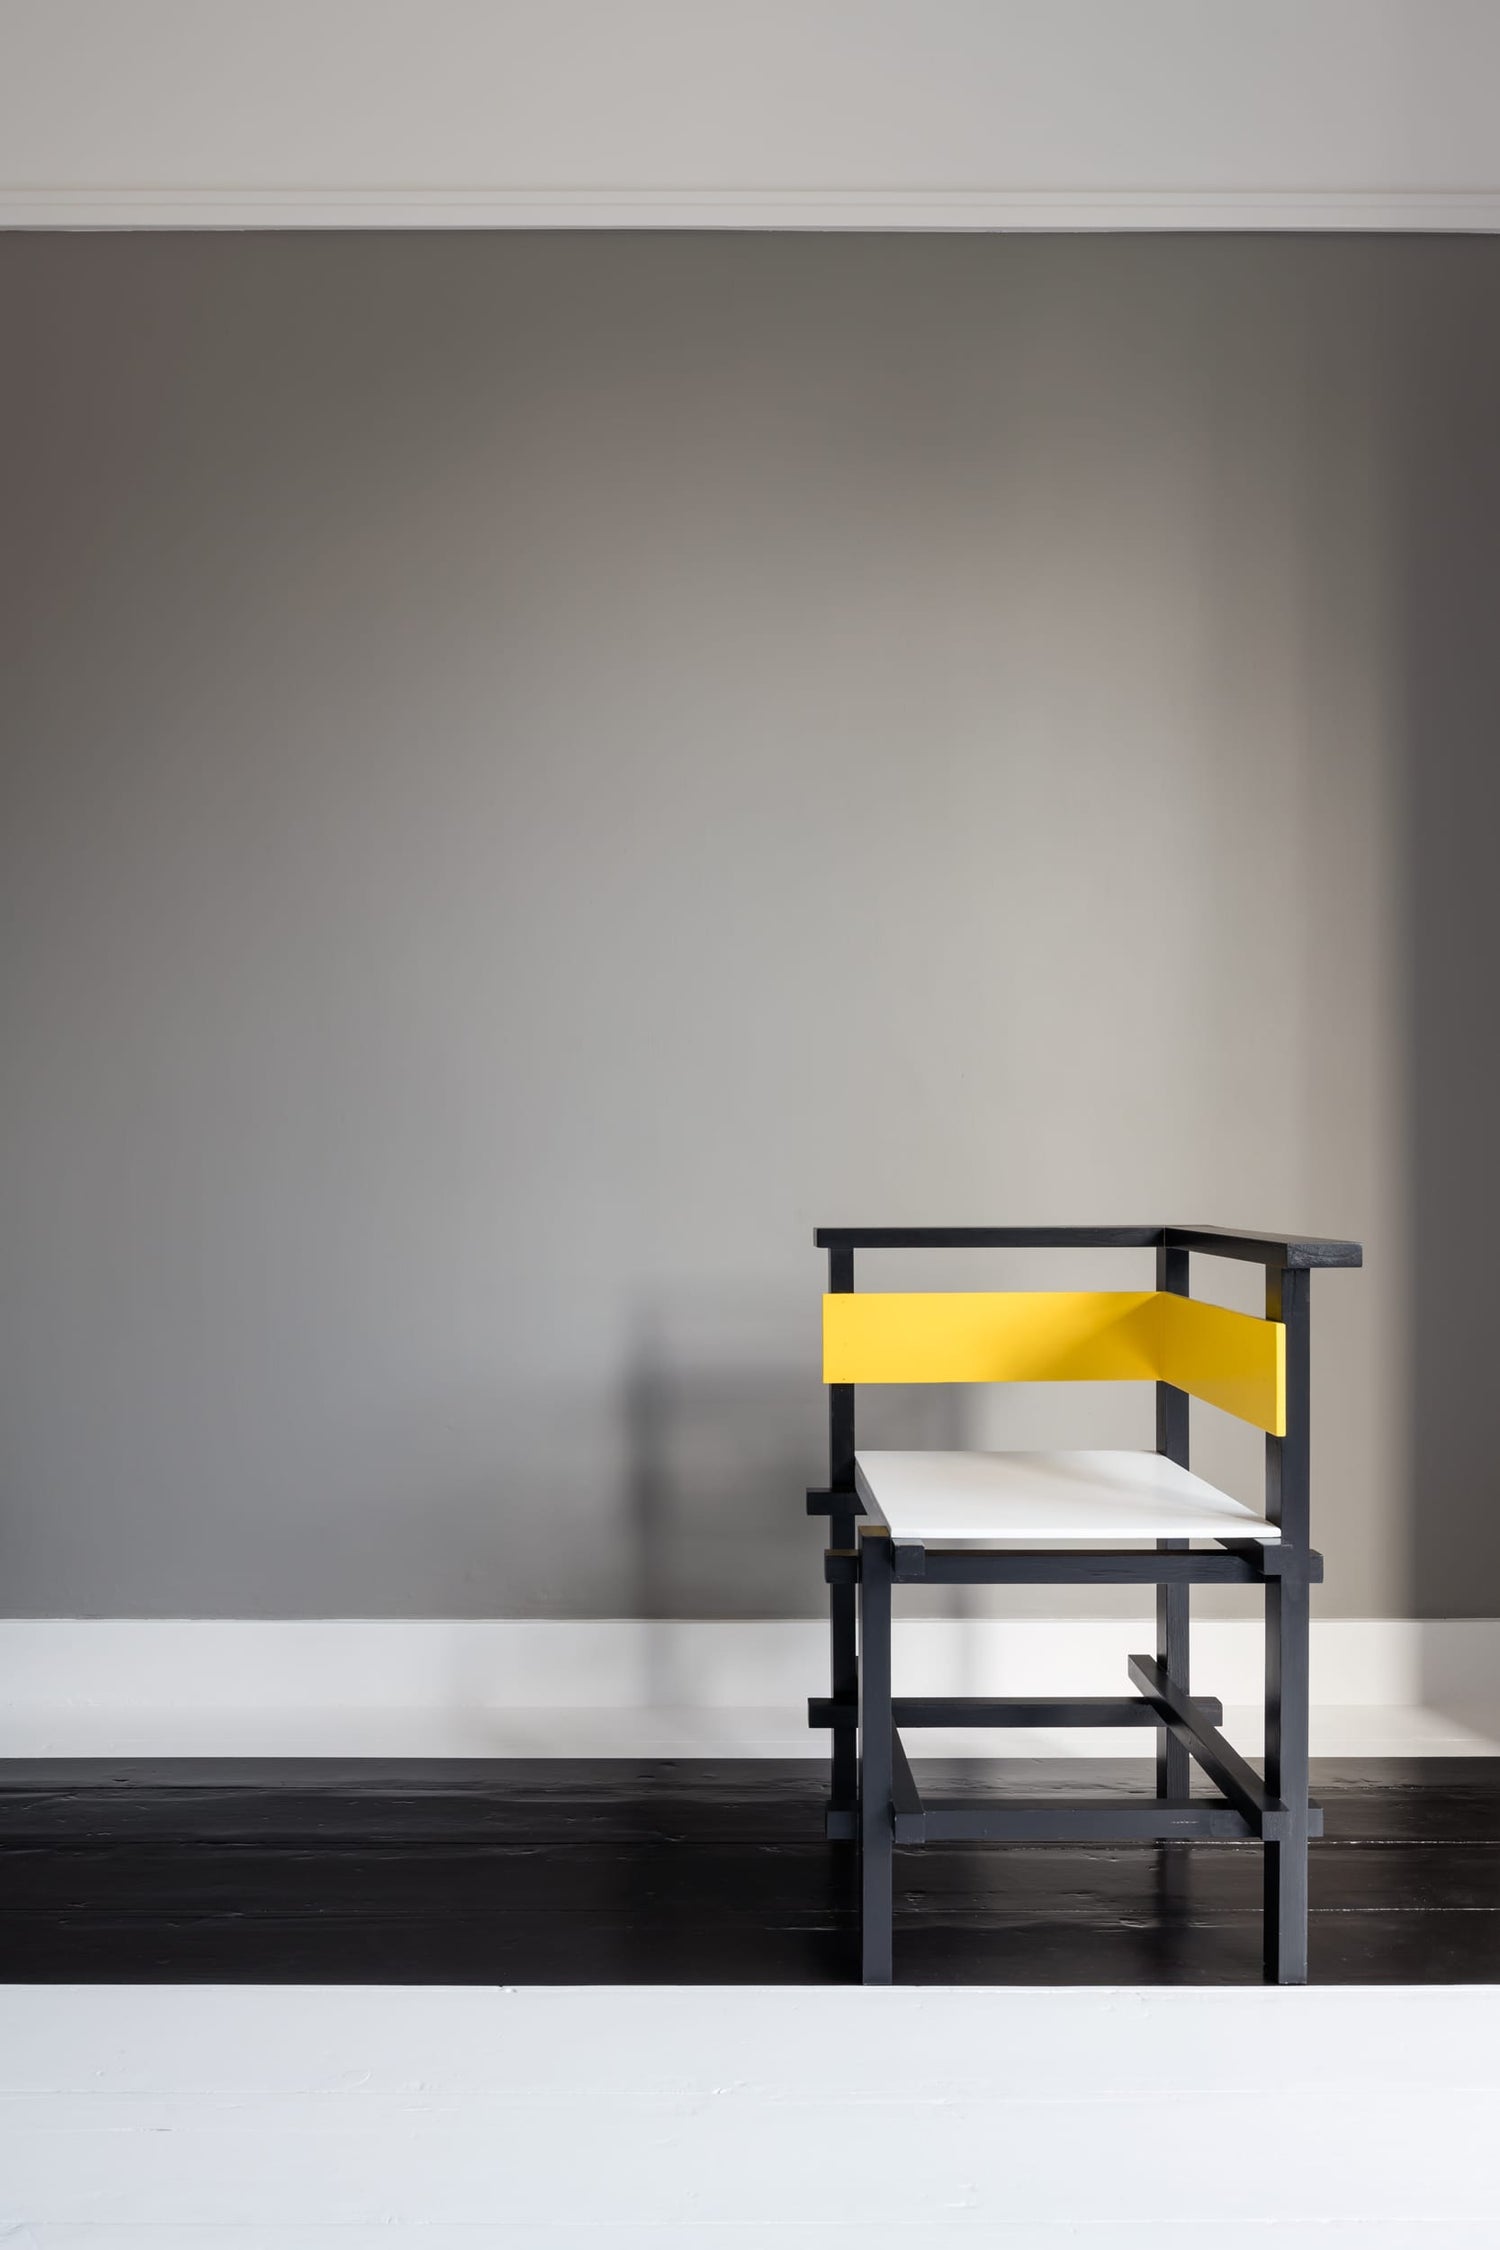 The artwork 'Van Doesburg-Rinsemahuis #4' by J.T. Hof displaying a lonely black and yellow chair deliberately placed in front of a grey wall